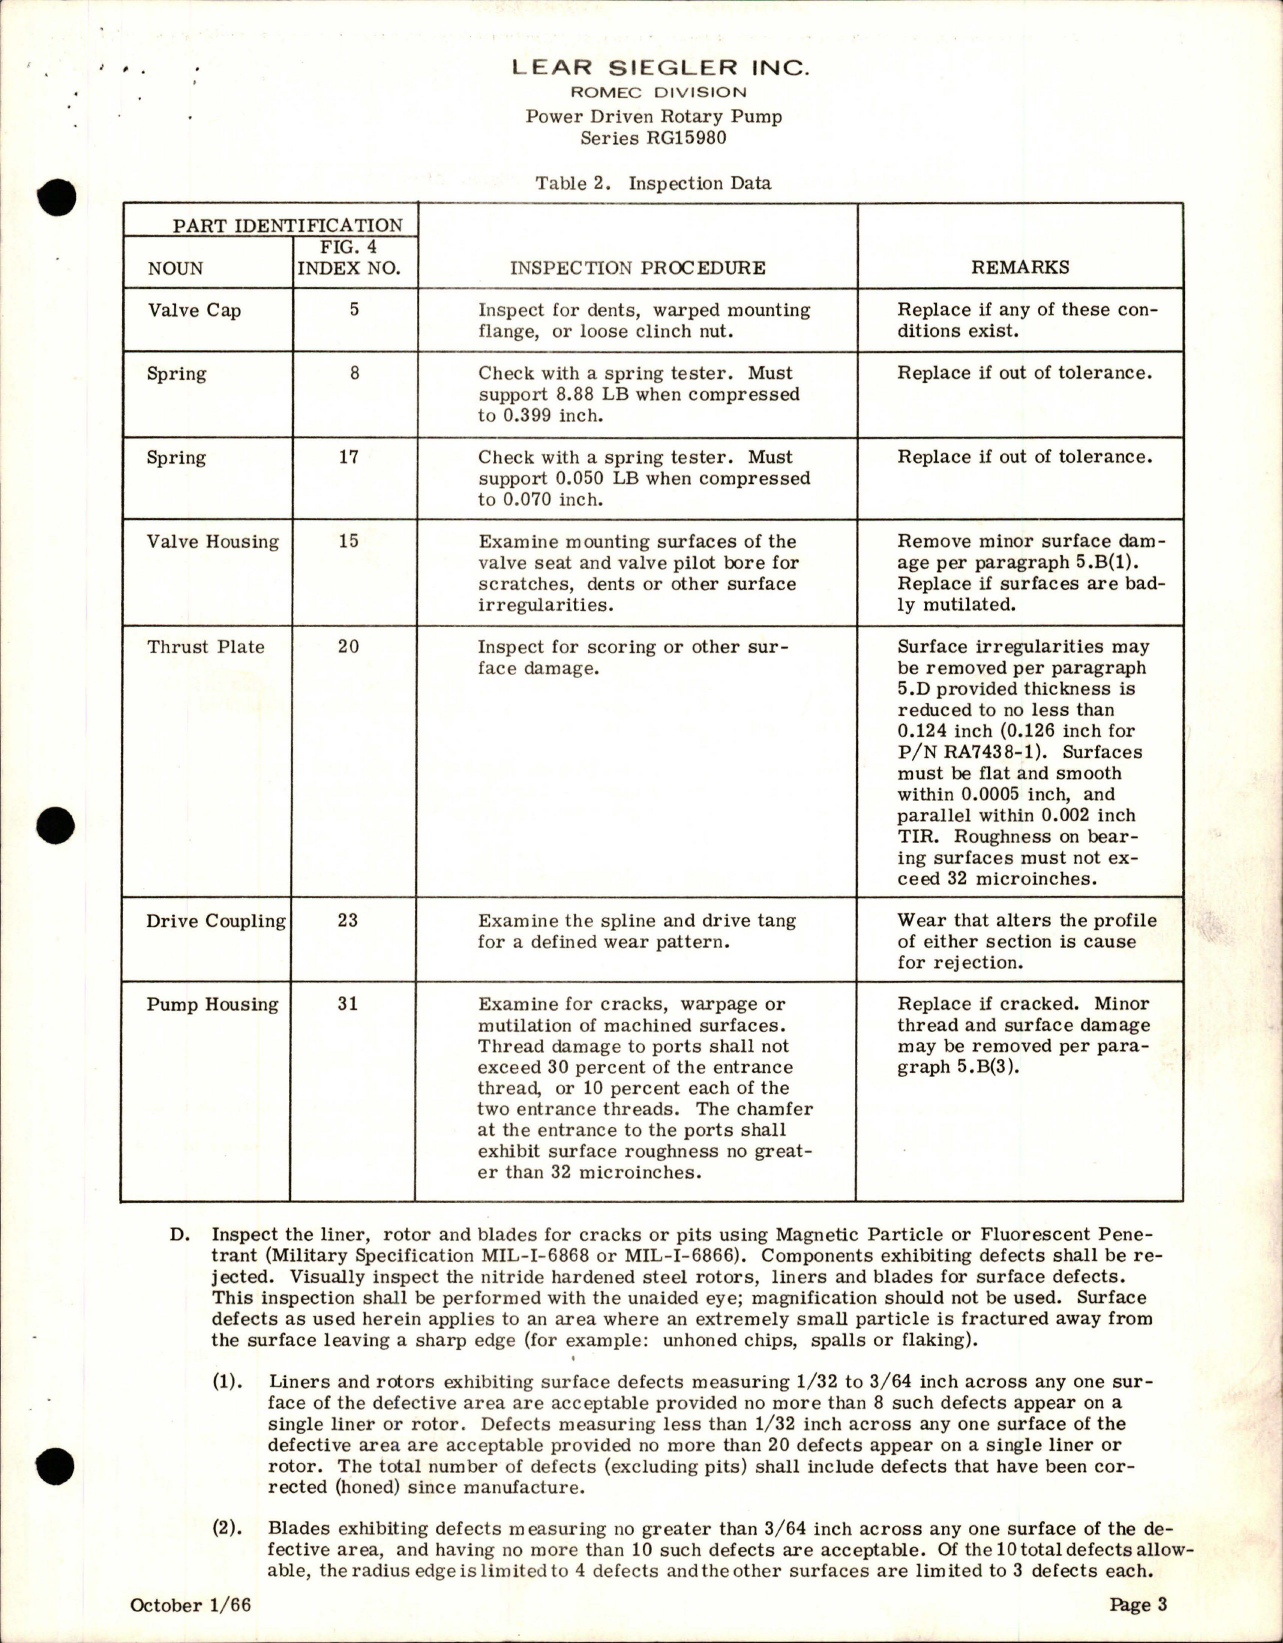 Sample page 7 from AirCorps Library document: Overhaul Instructions with Parts Catalog for Power Driven Rotary Pump - RGI5980 Series